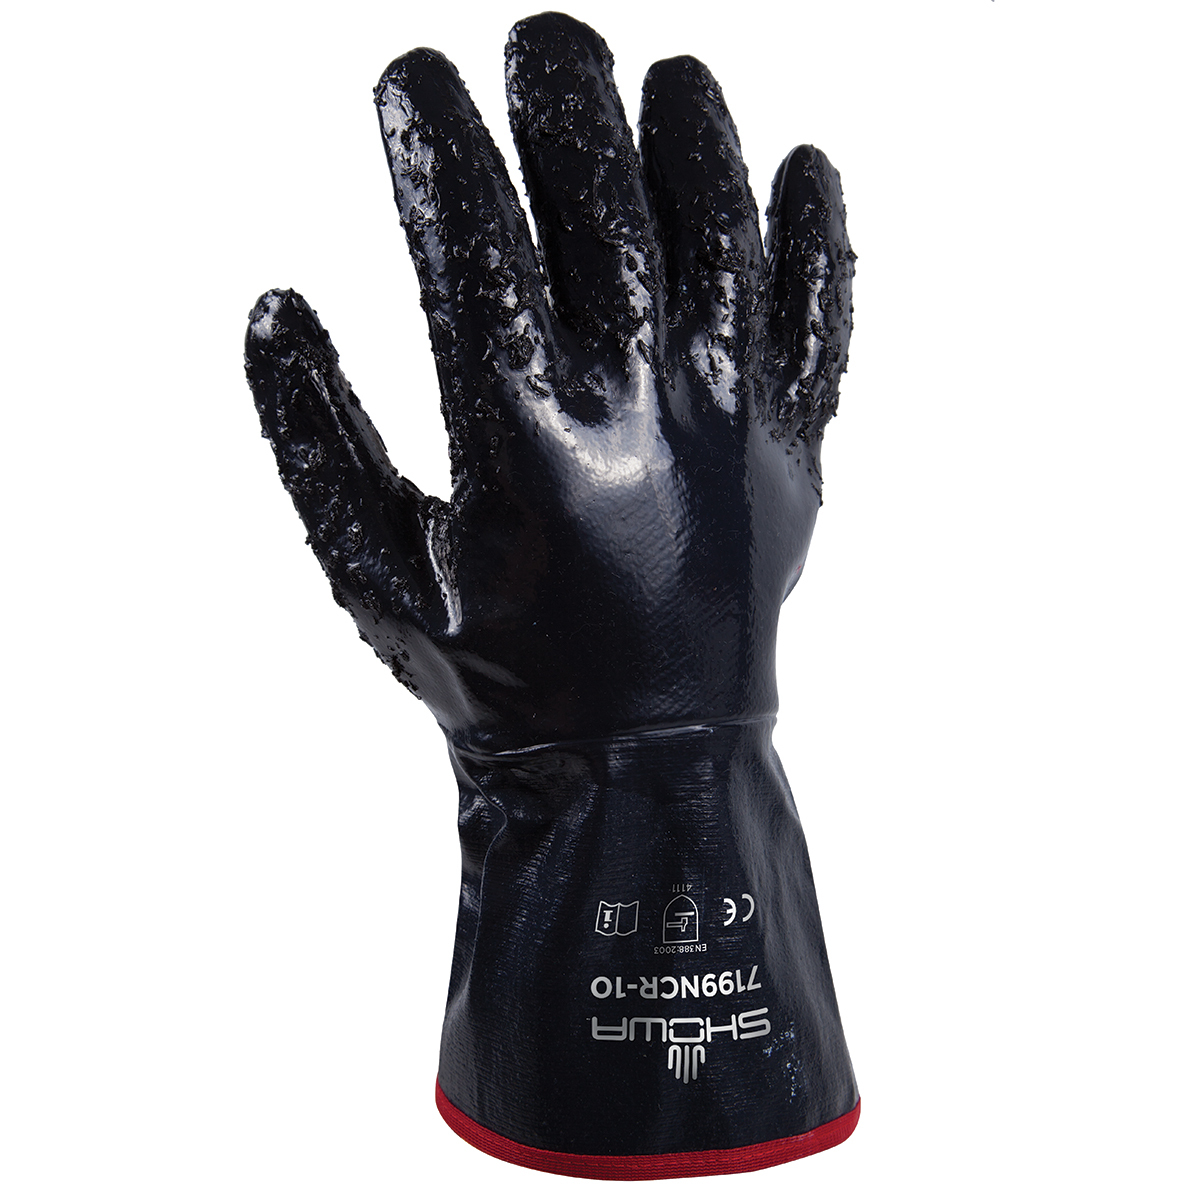 SHOWA® Size 10 Heavy Duty Nitrile Full Hand Coated Work Gloves With Cotton Liner And Gauntlet Cuff